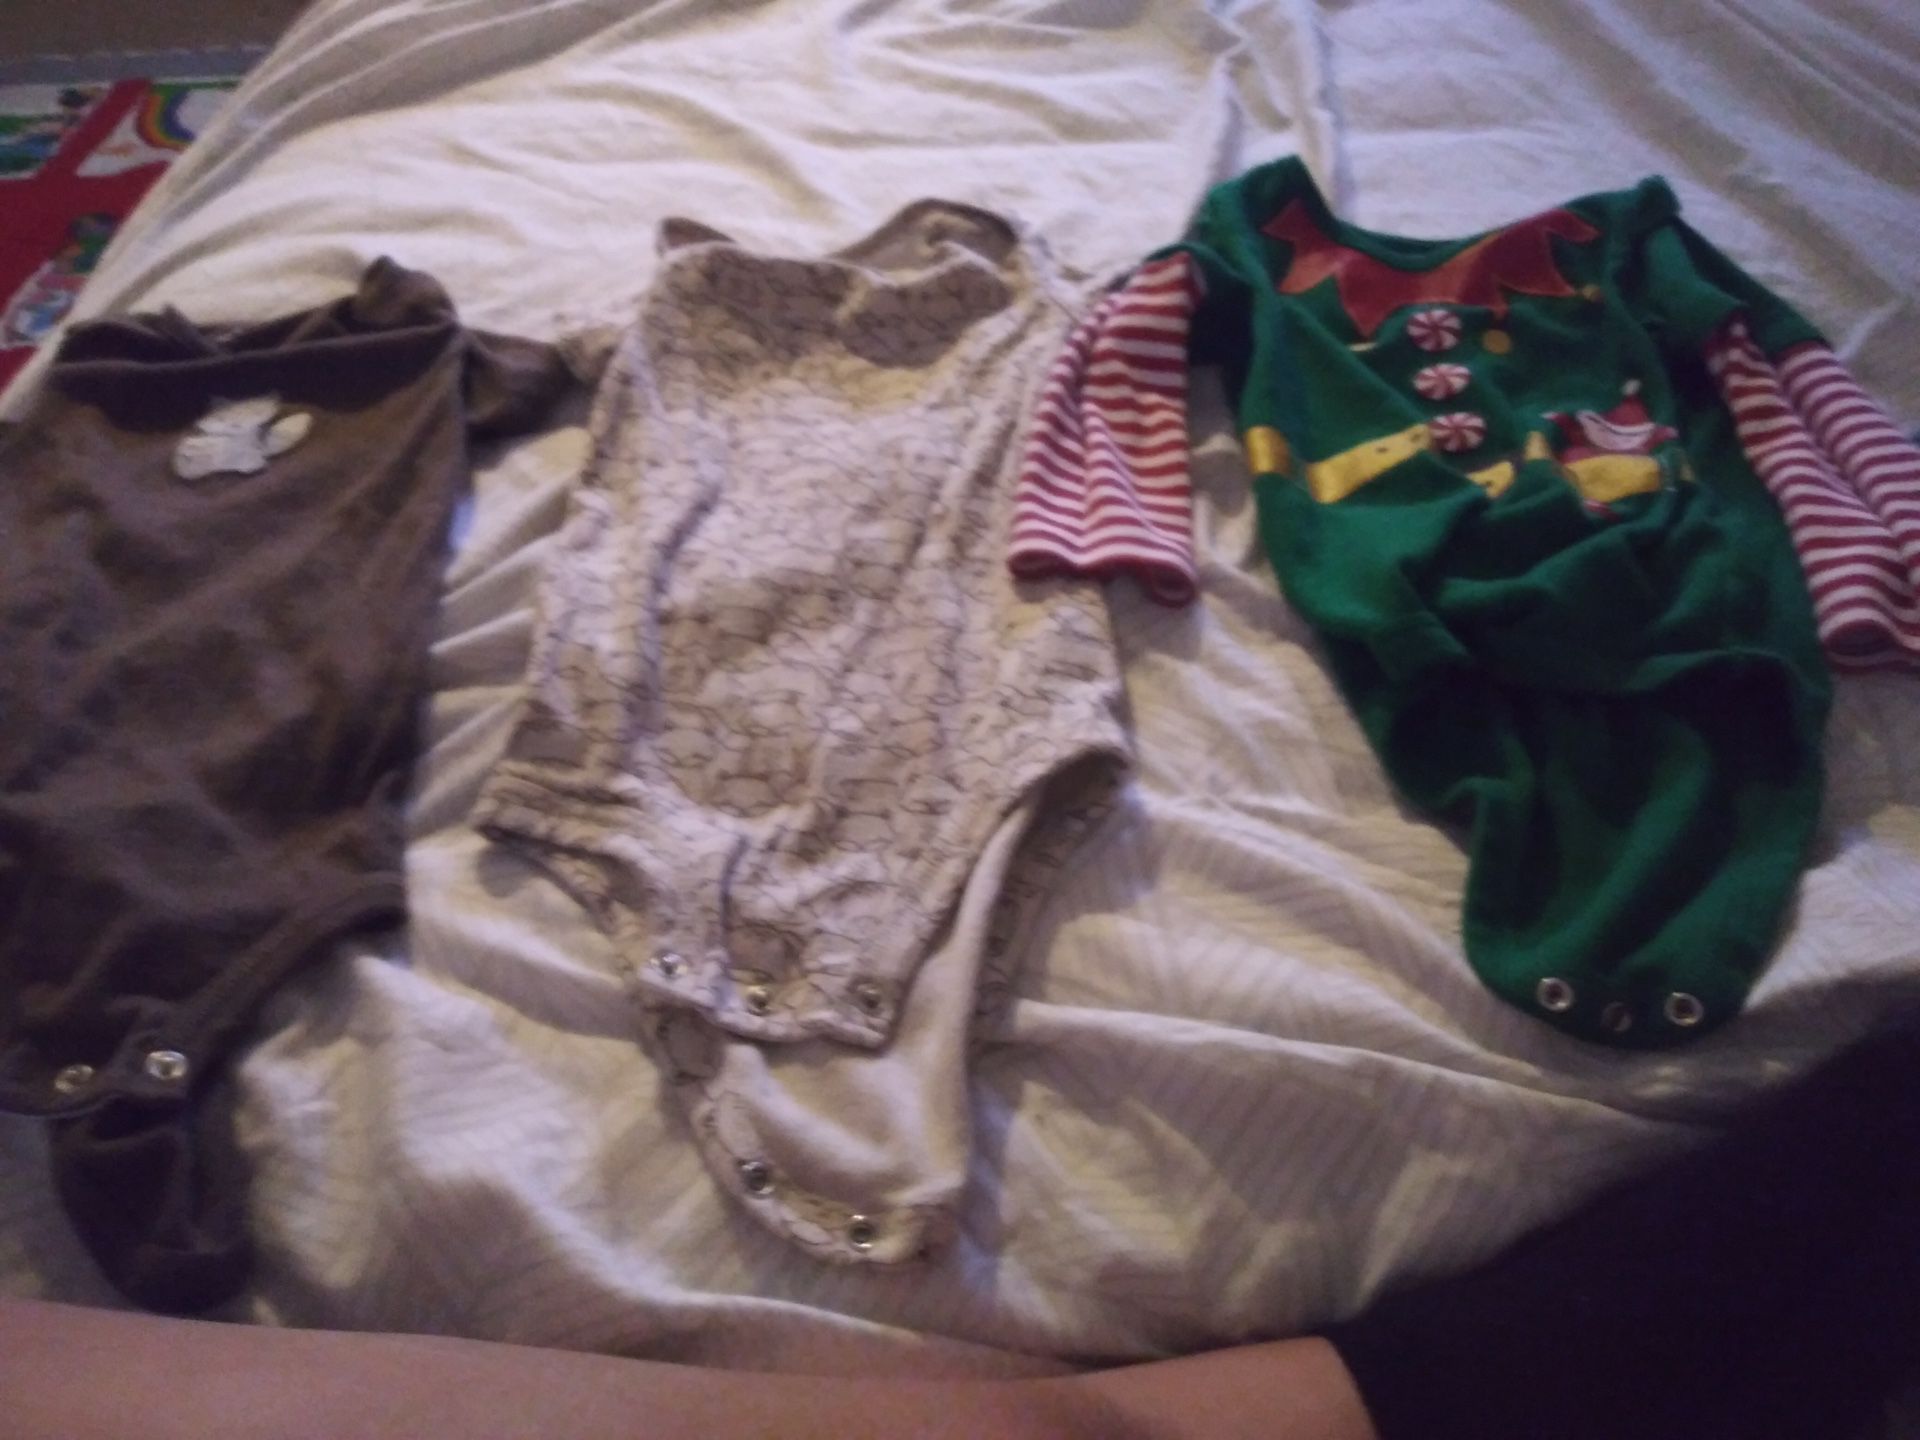 Free 18 months clothes